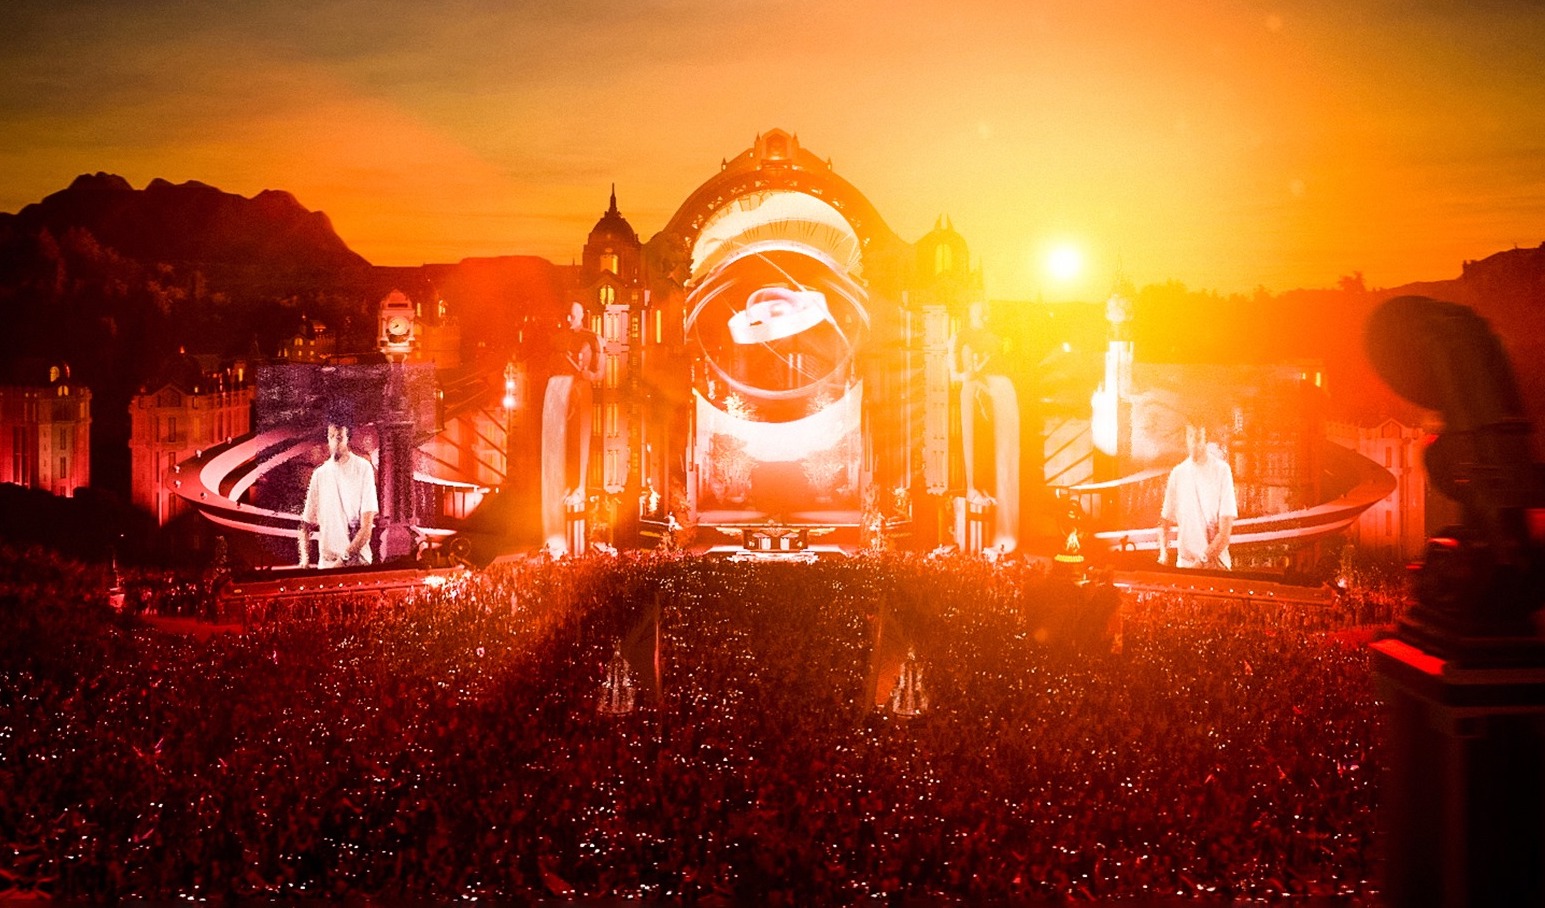 Virtual edition of Tomorrowland festival viewed by over a million